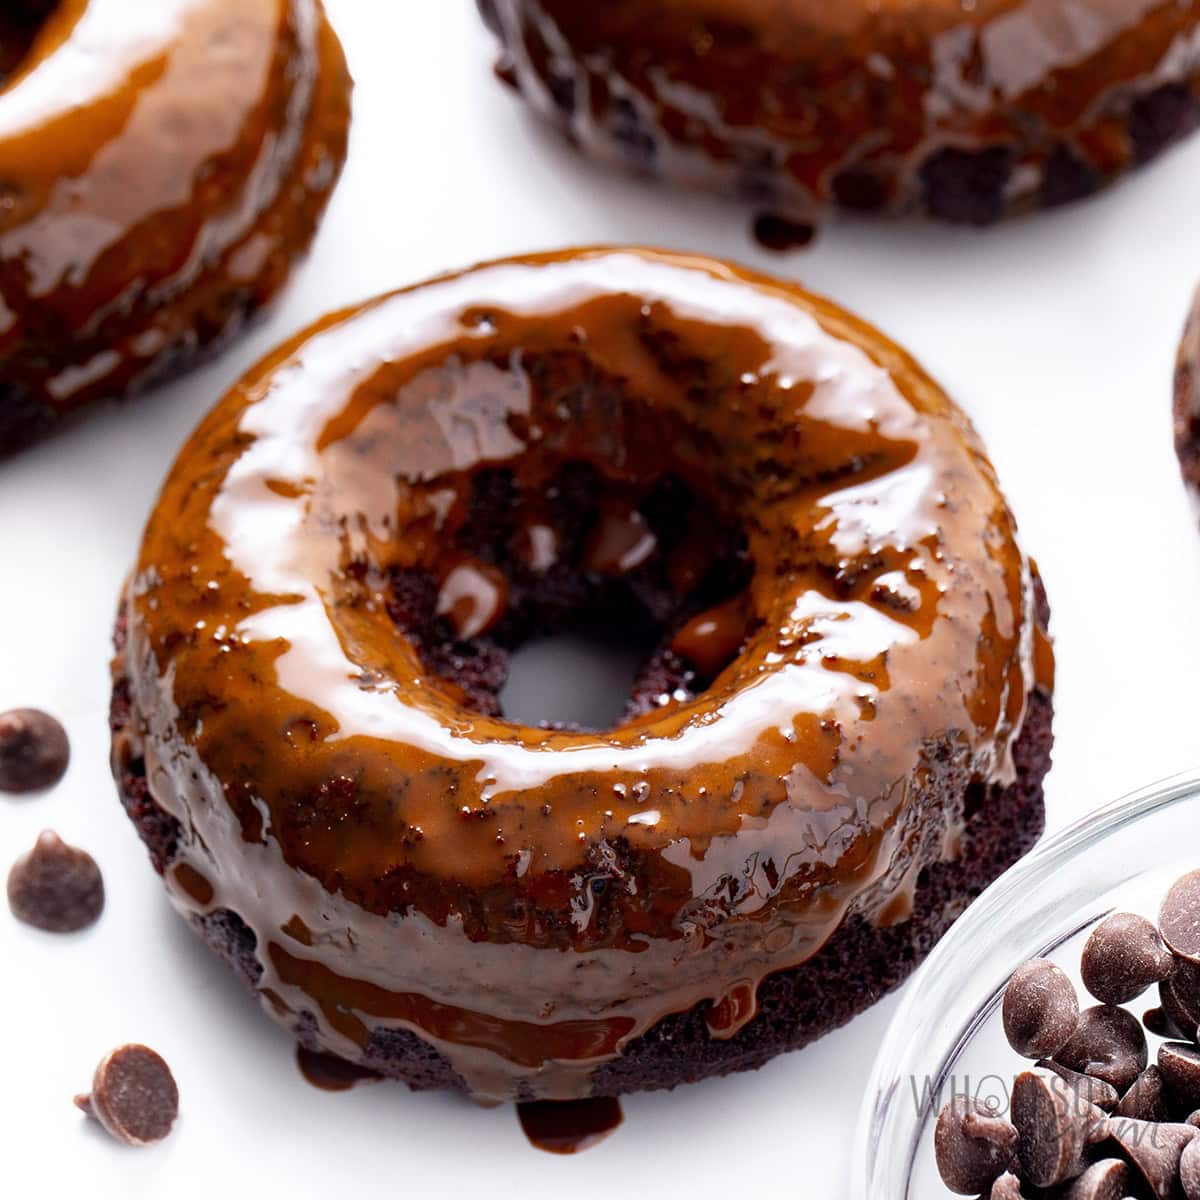 Glazed chocolate protein donuts on a white counter next to some chocolate chips.